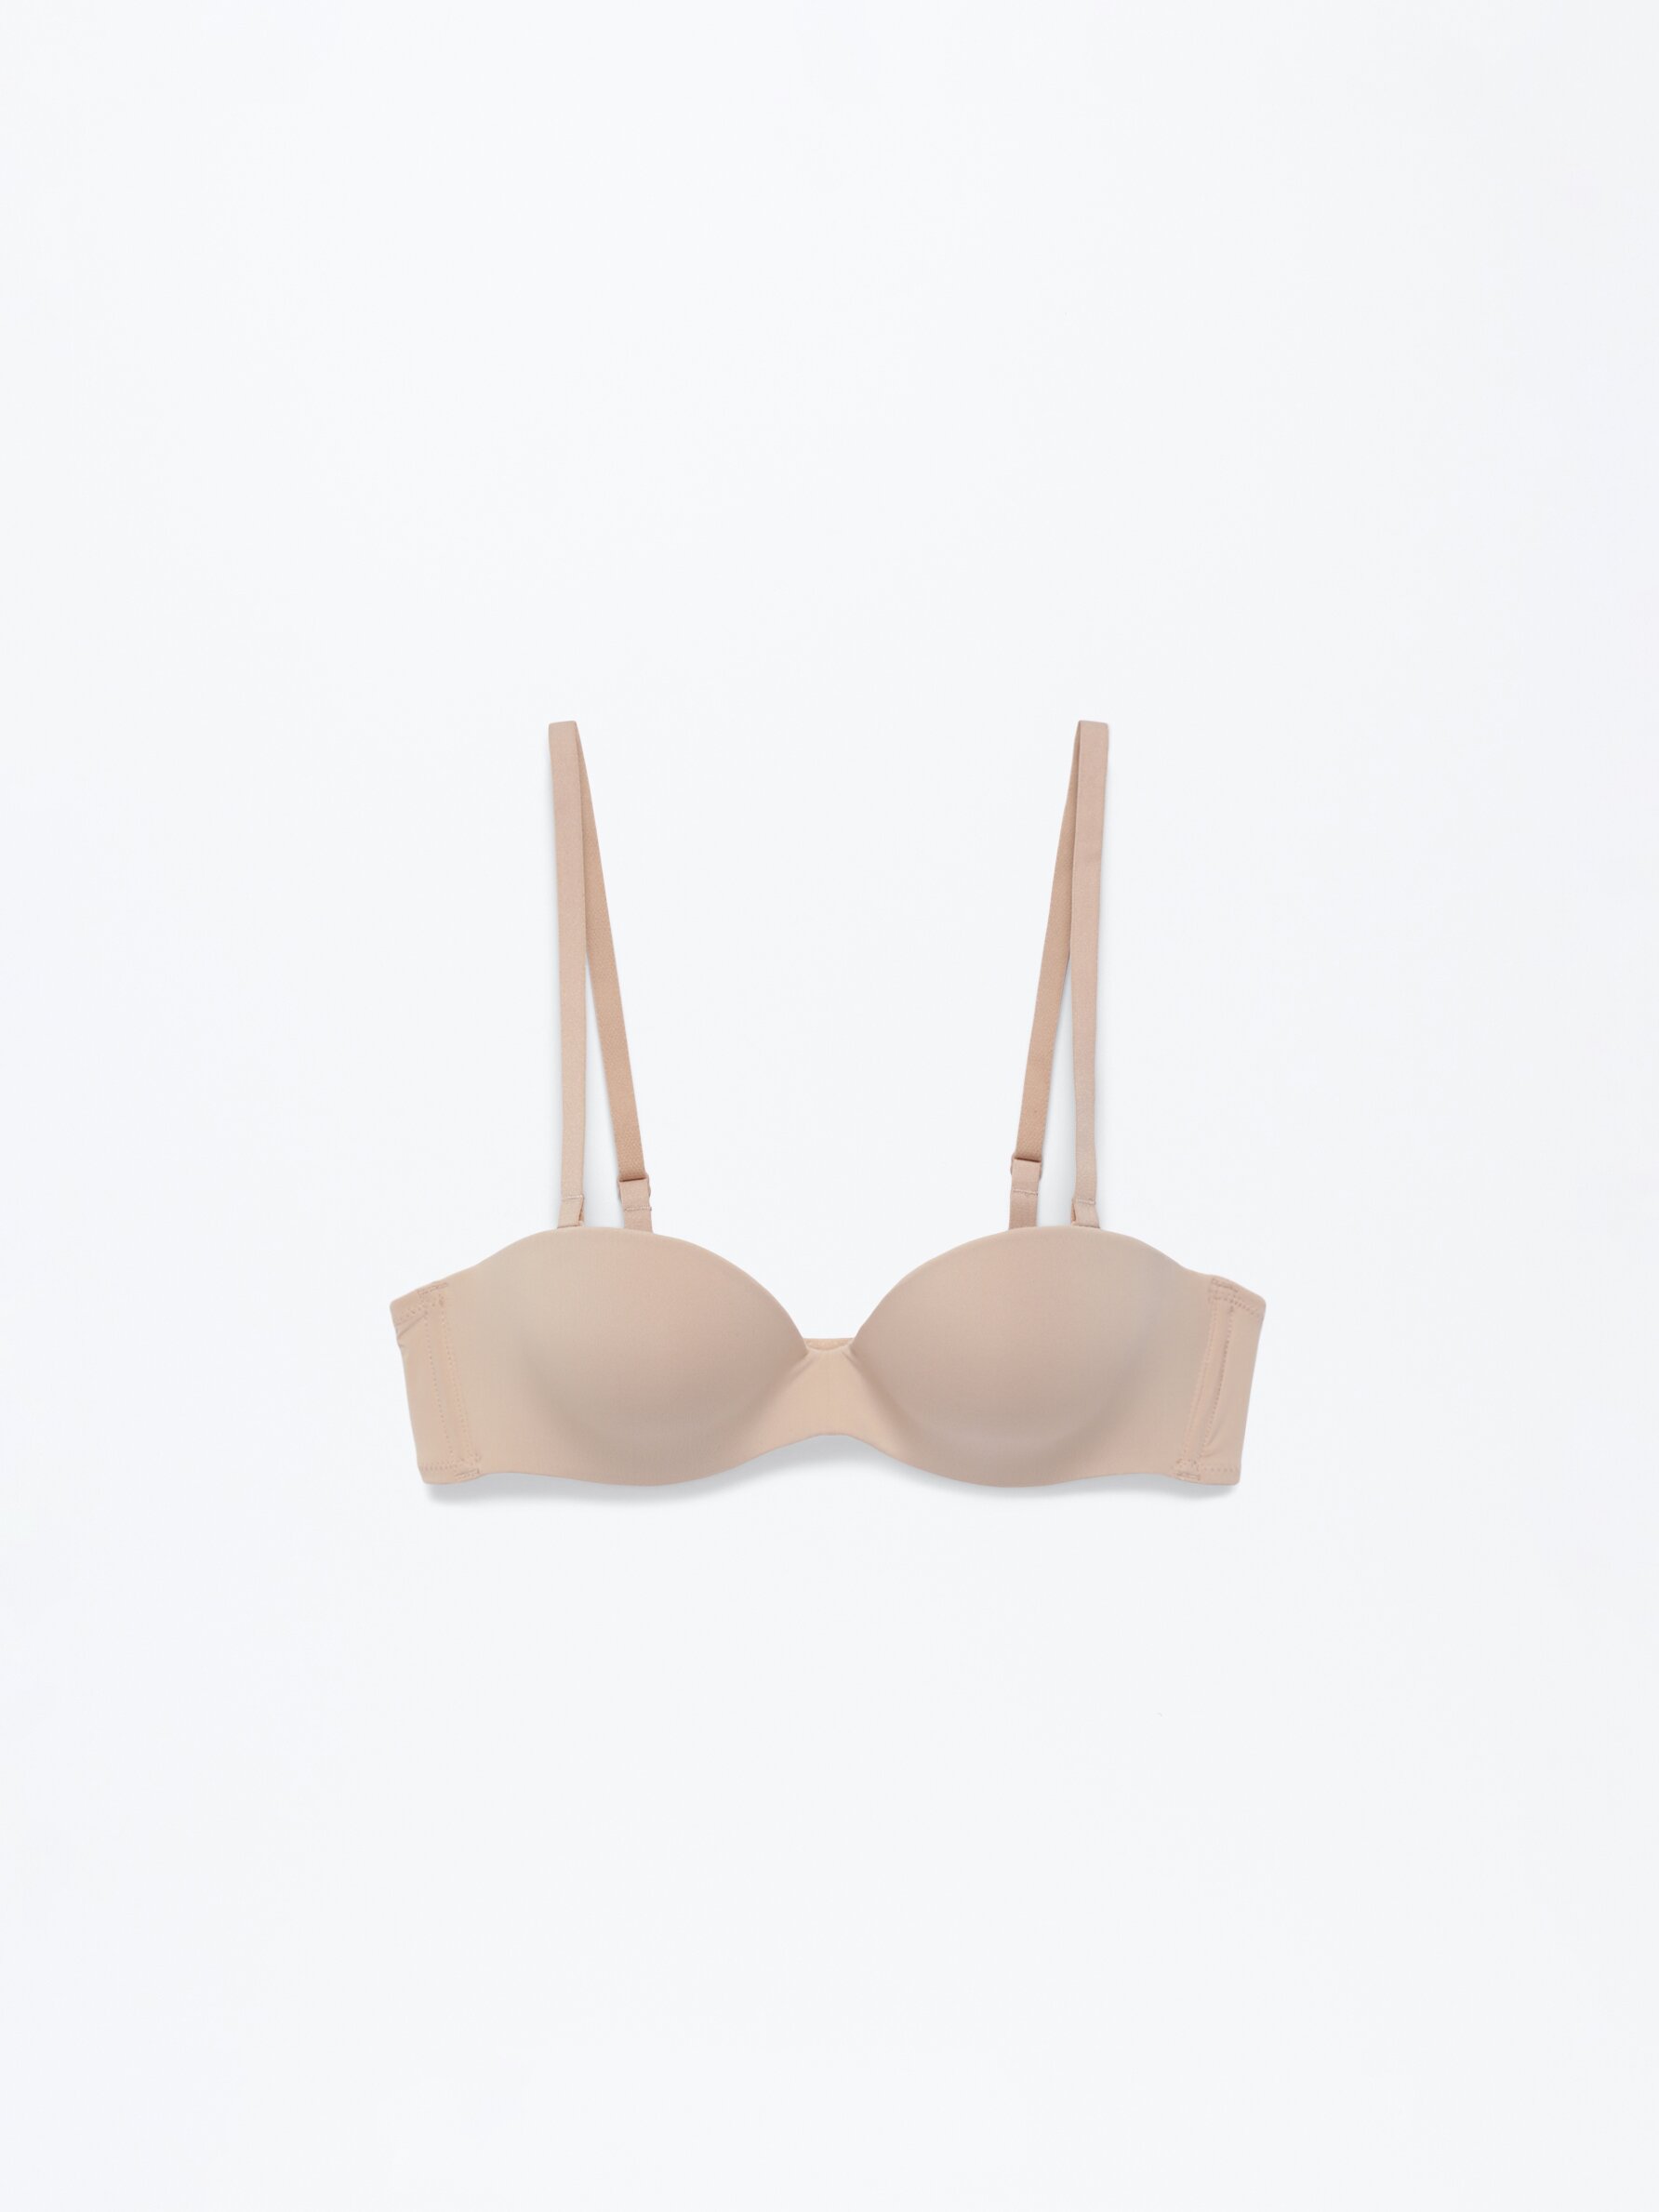 Padded Bras: Push-Up, Strapless and Other Bras with Padding